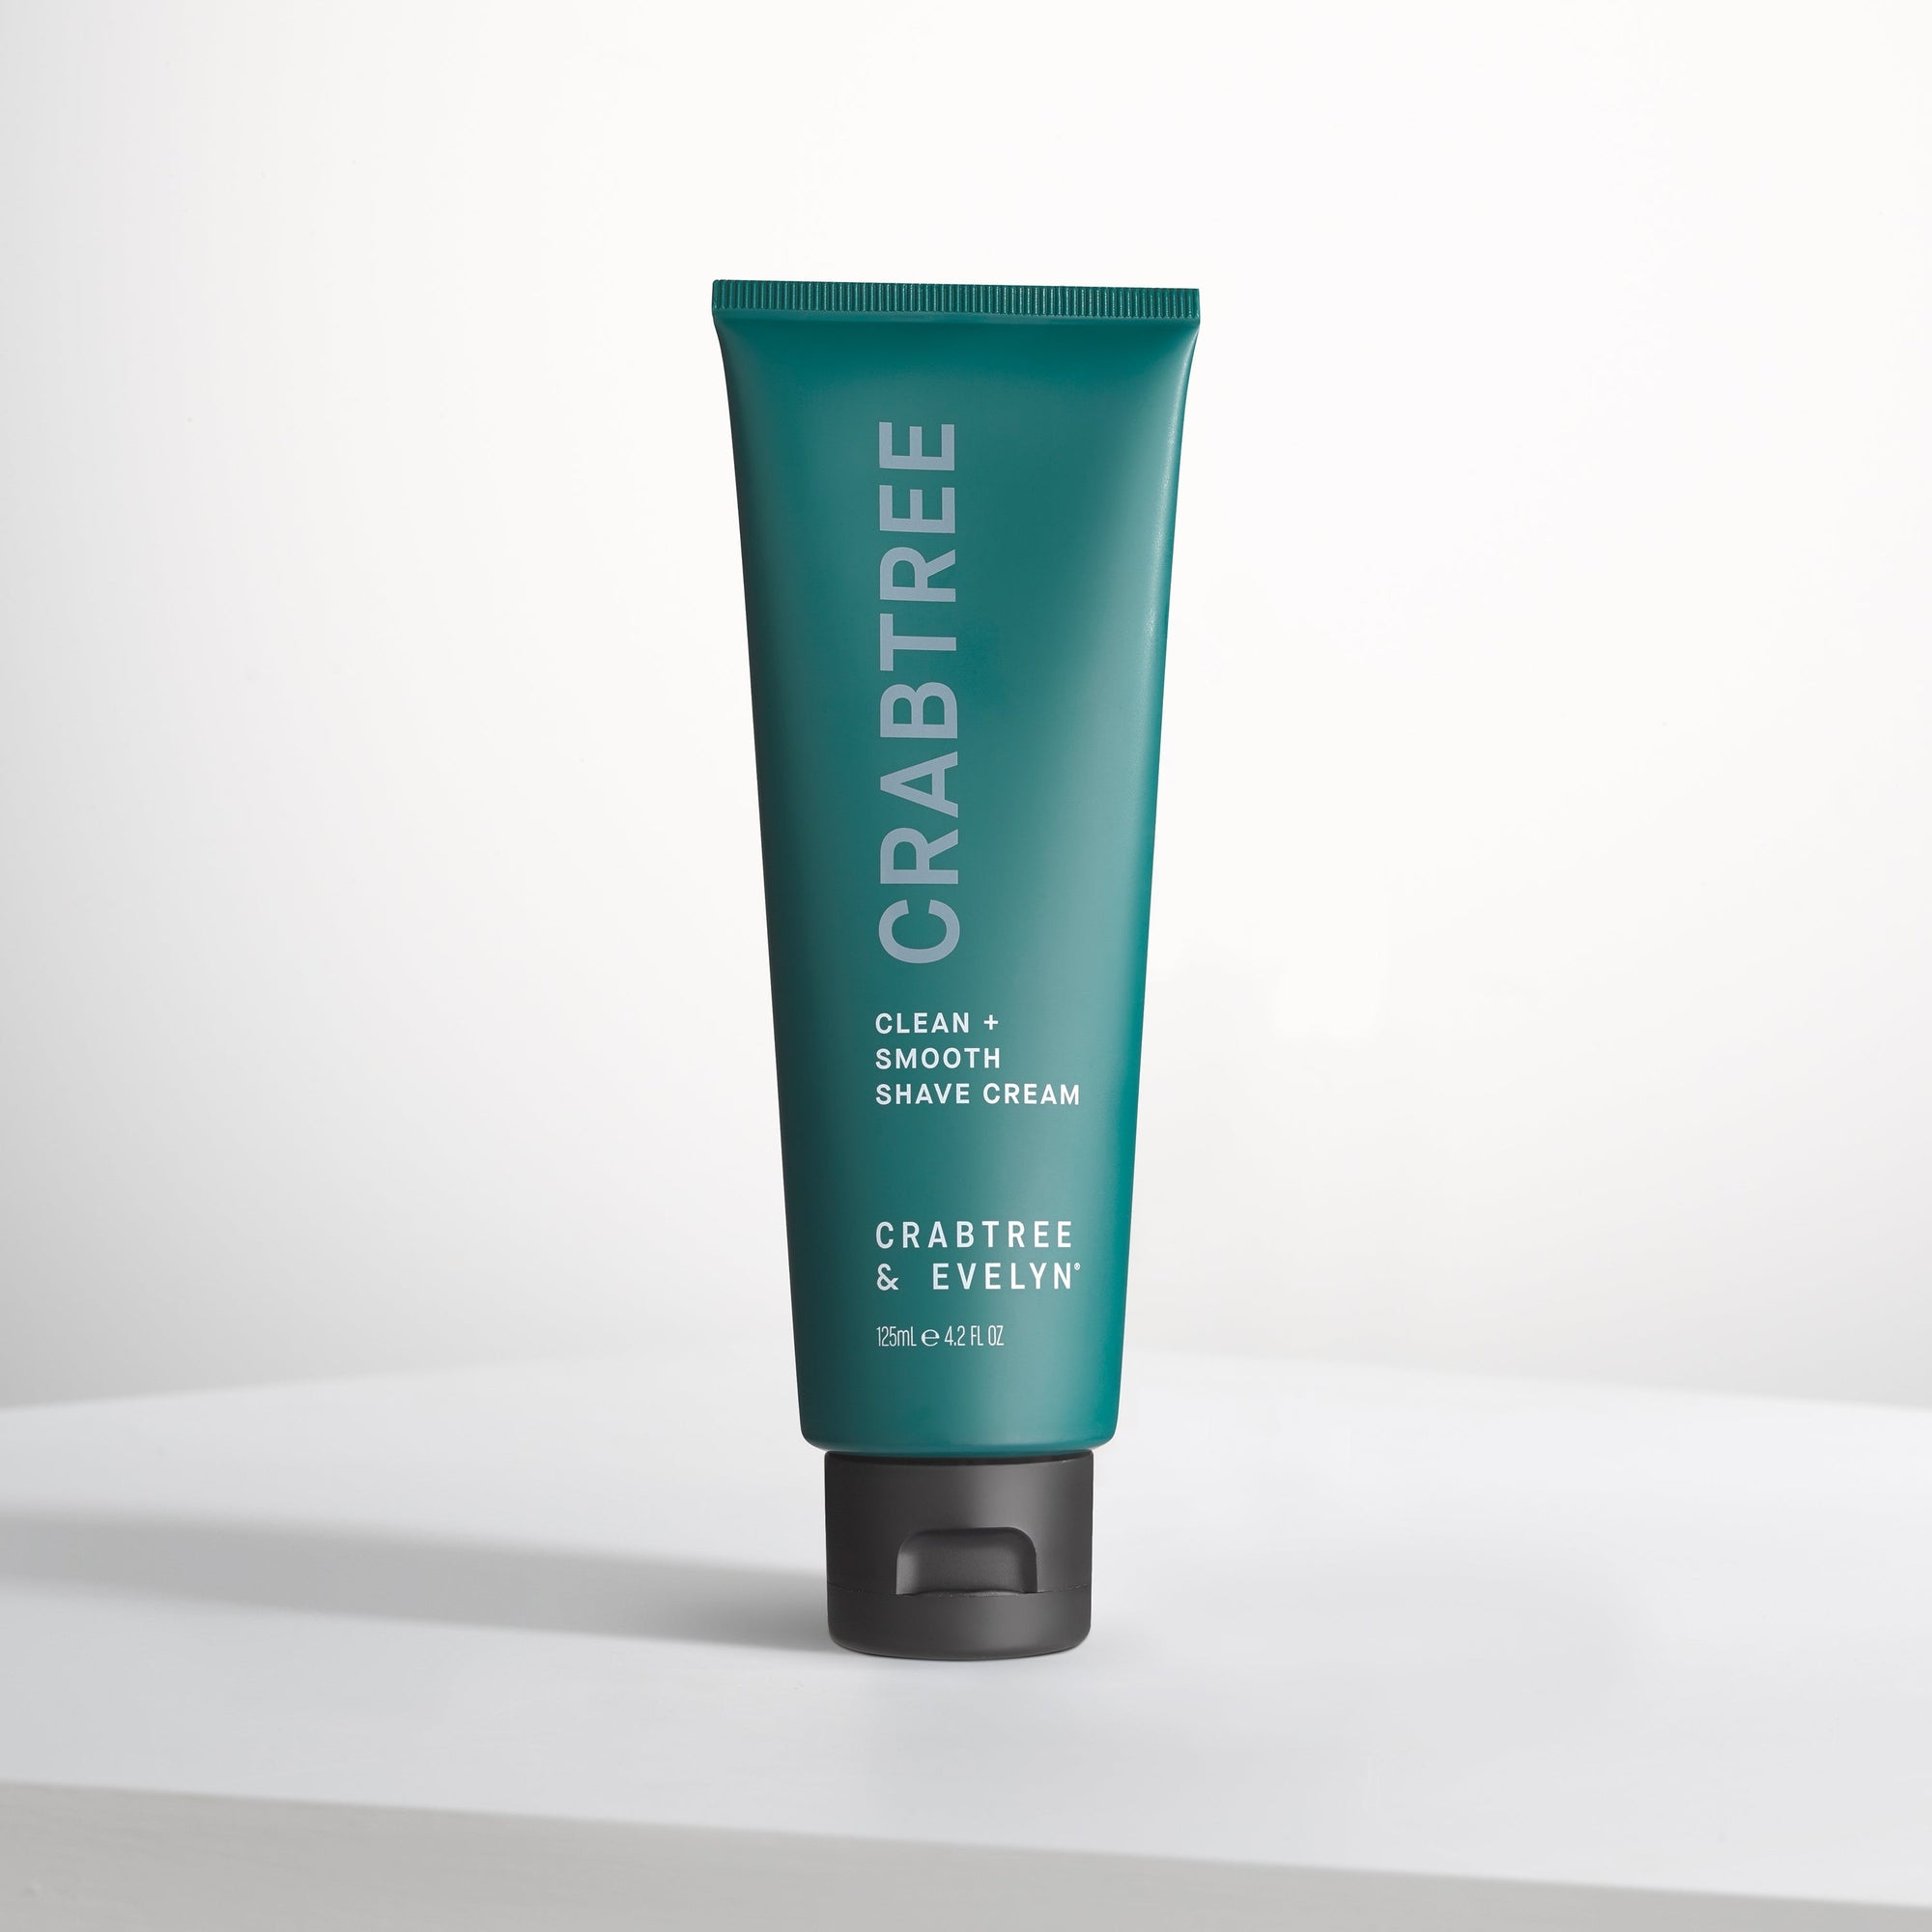 Crabtree & Evelyn-Clean + Smooth Shave Cream - 125ml